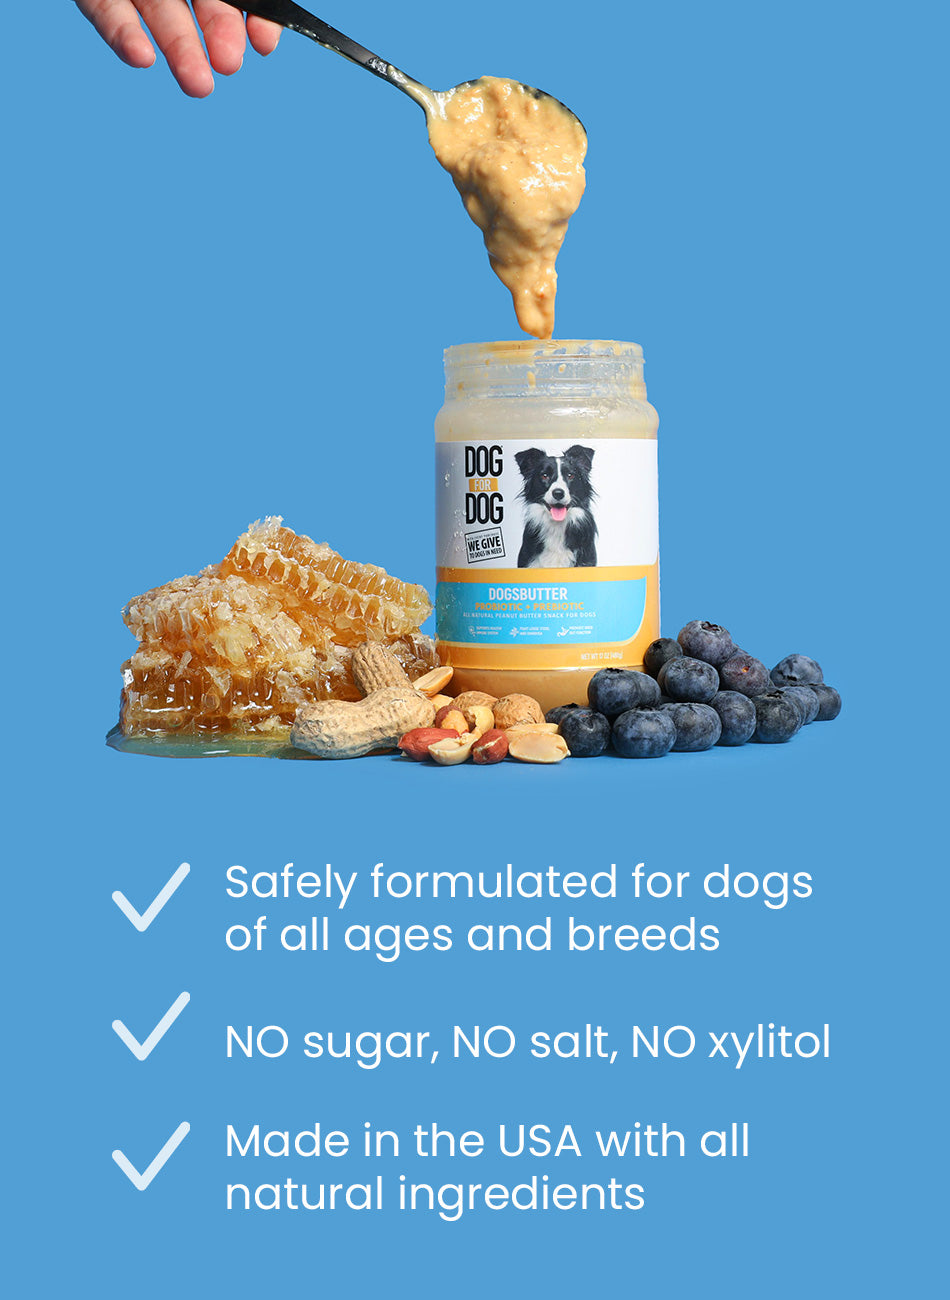 can peanut butter cause loose stools in dogs